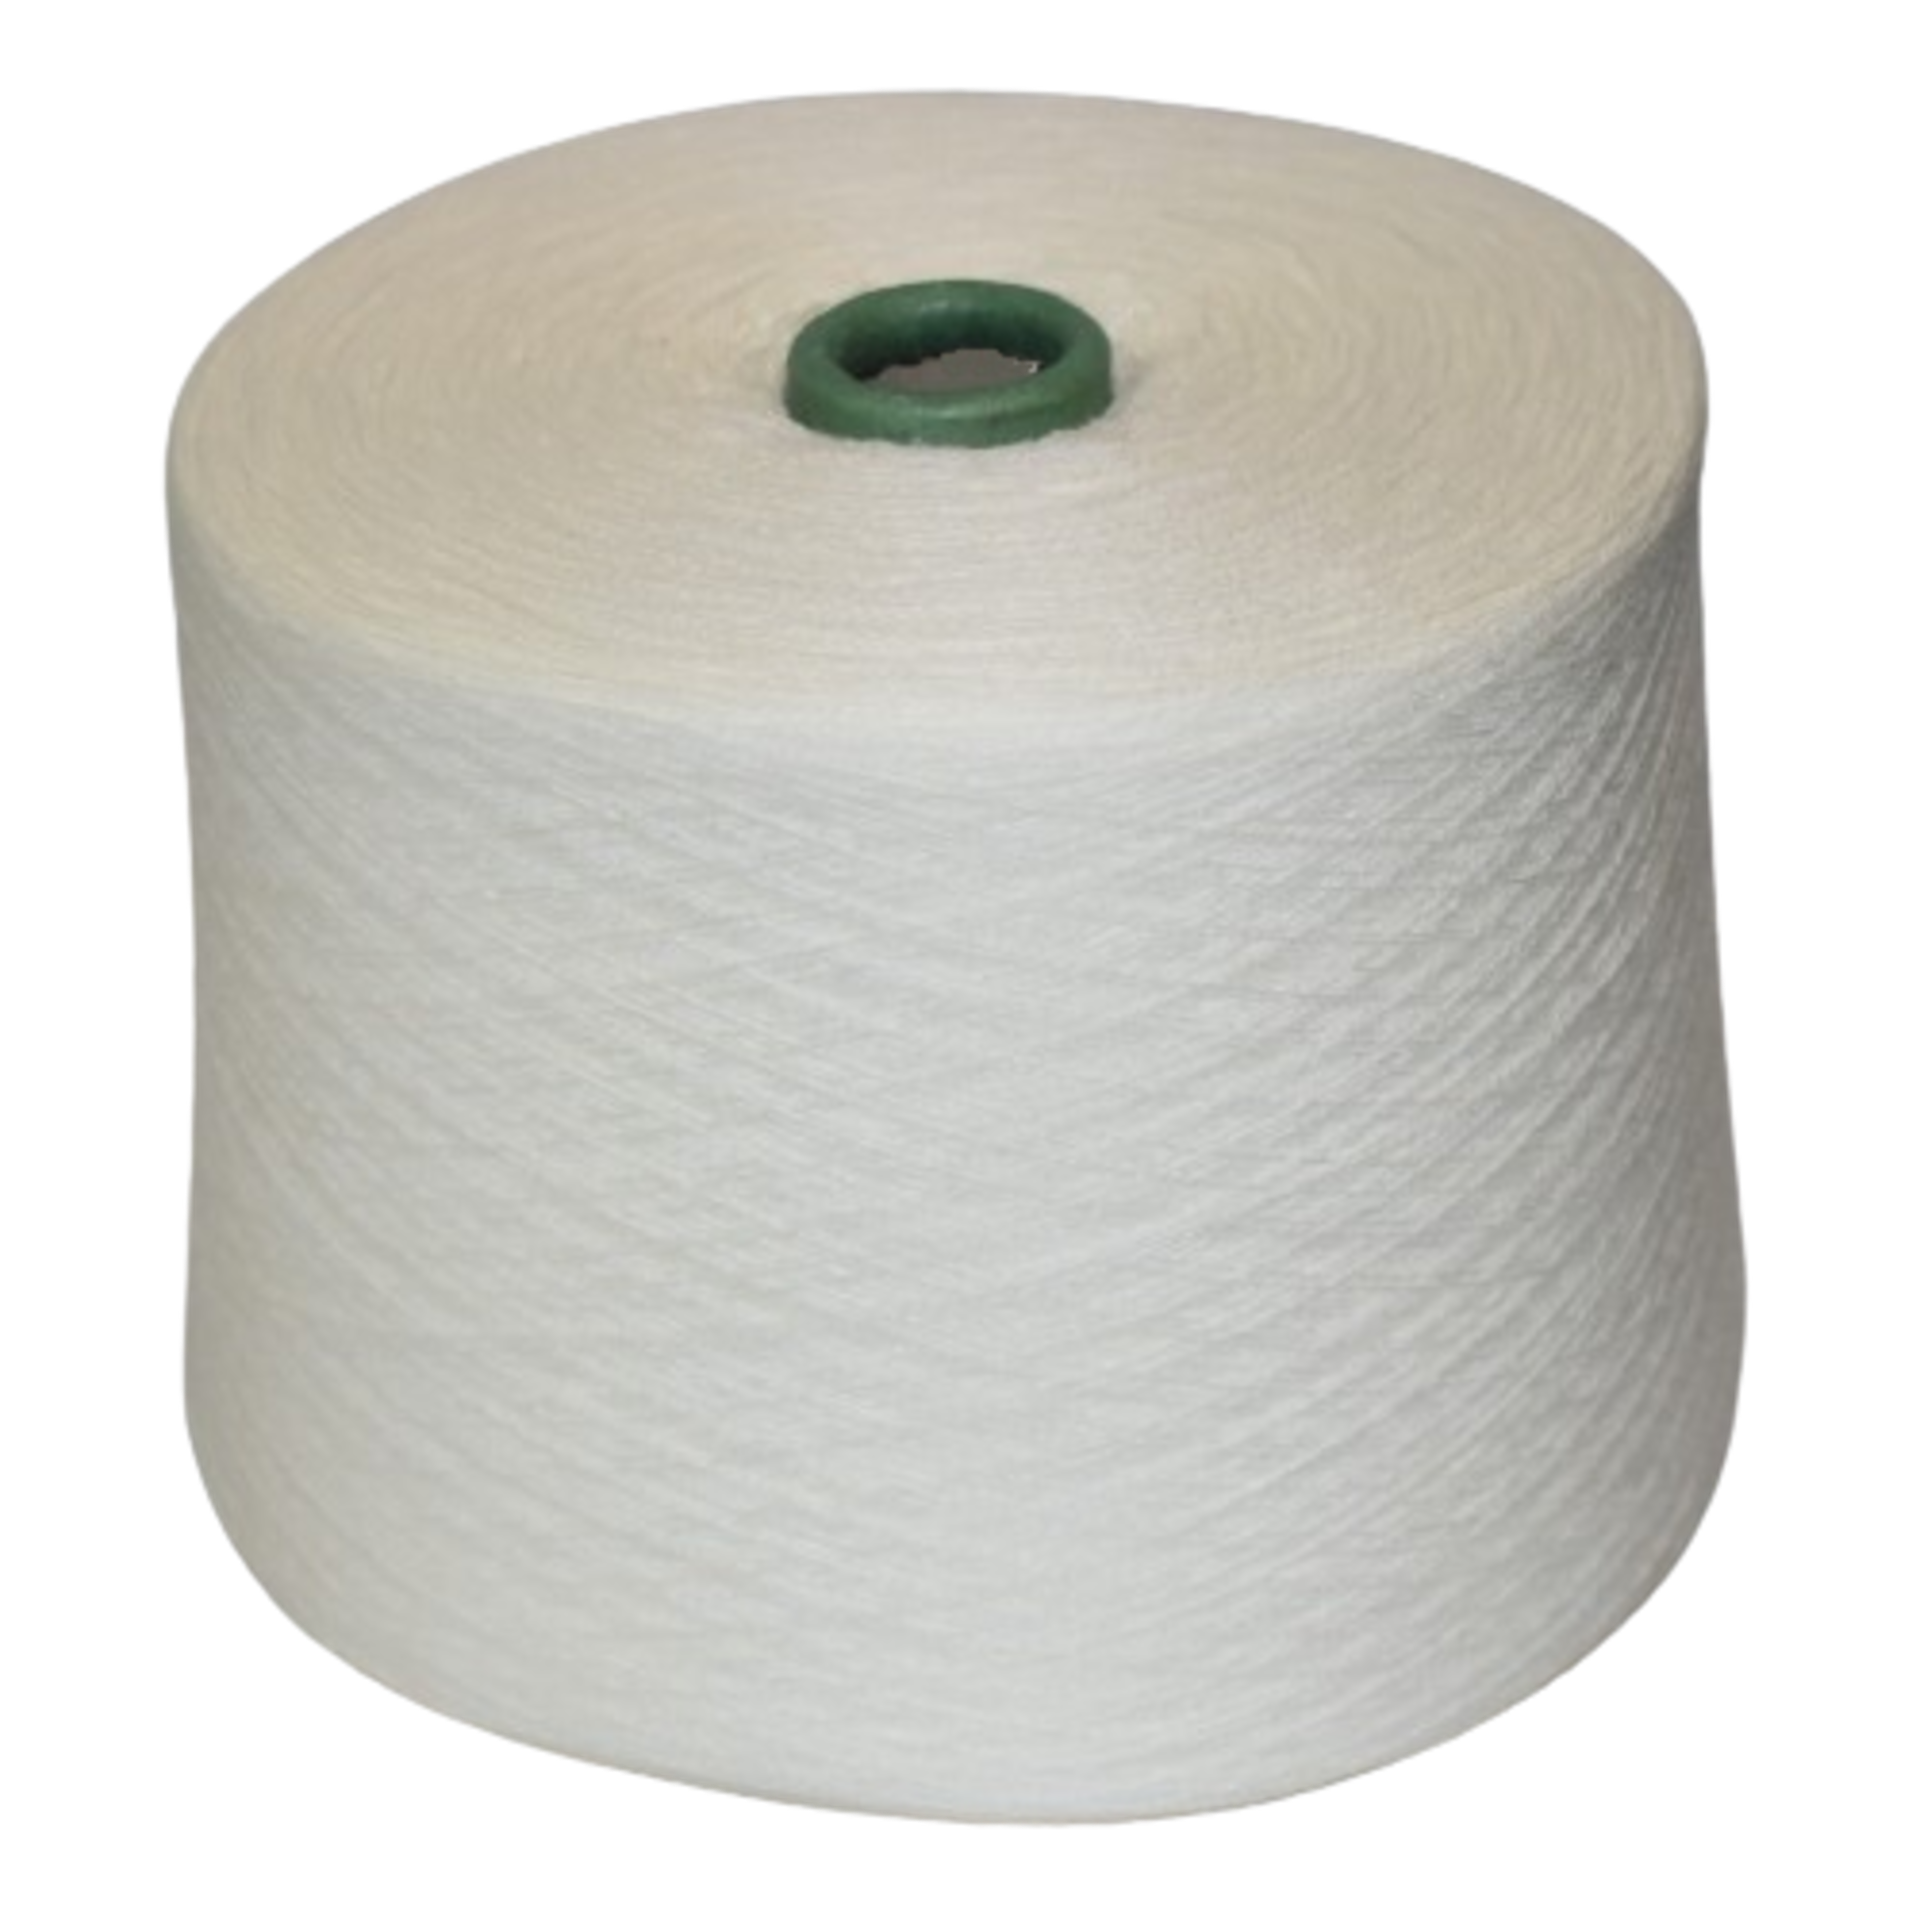 6 x Cones of 28/2 H.B 100% Acrylic Knitting Yarn - Colour: Ivory - Approx Weight: 1,300g - New Stock